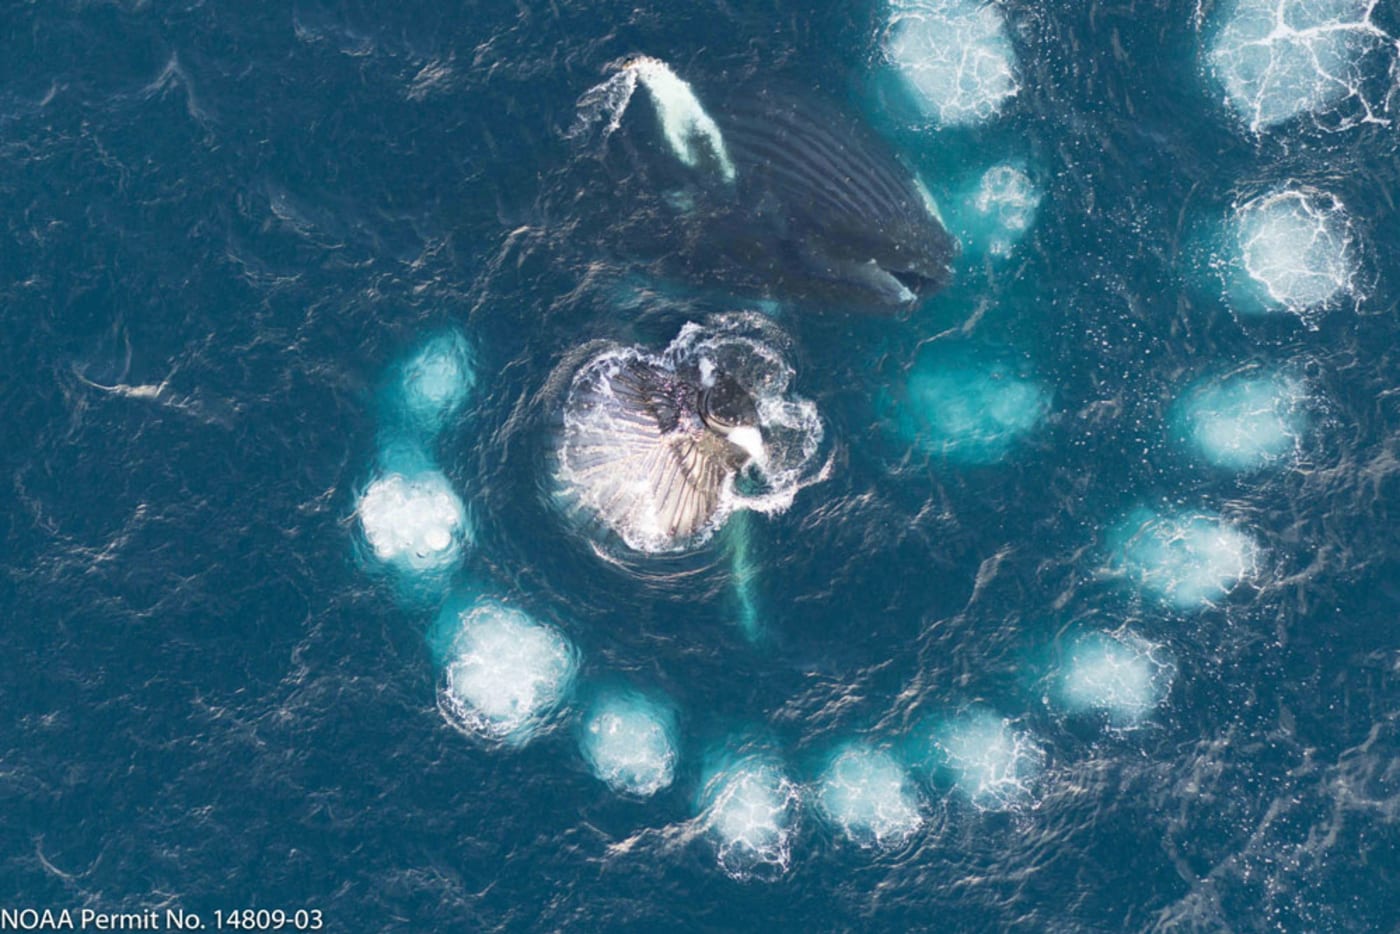 Drone footage of humpback whales bubble net feeding in Antarctica